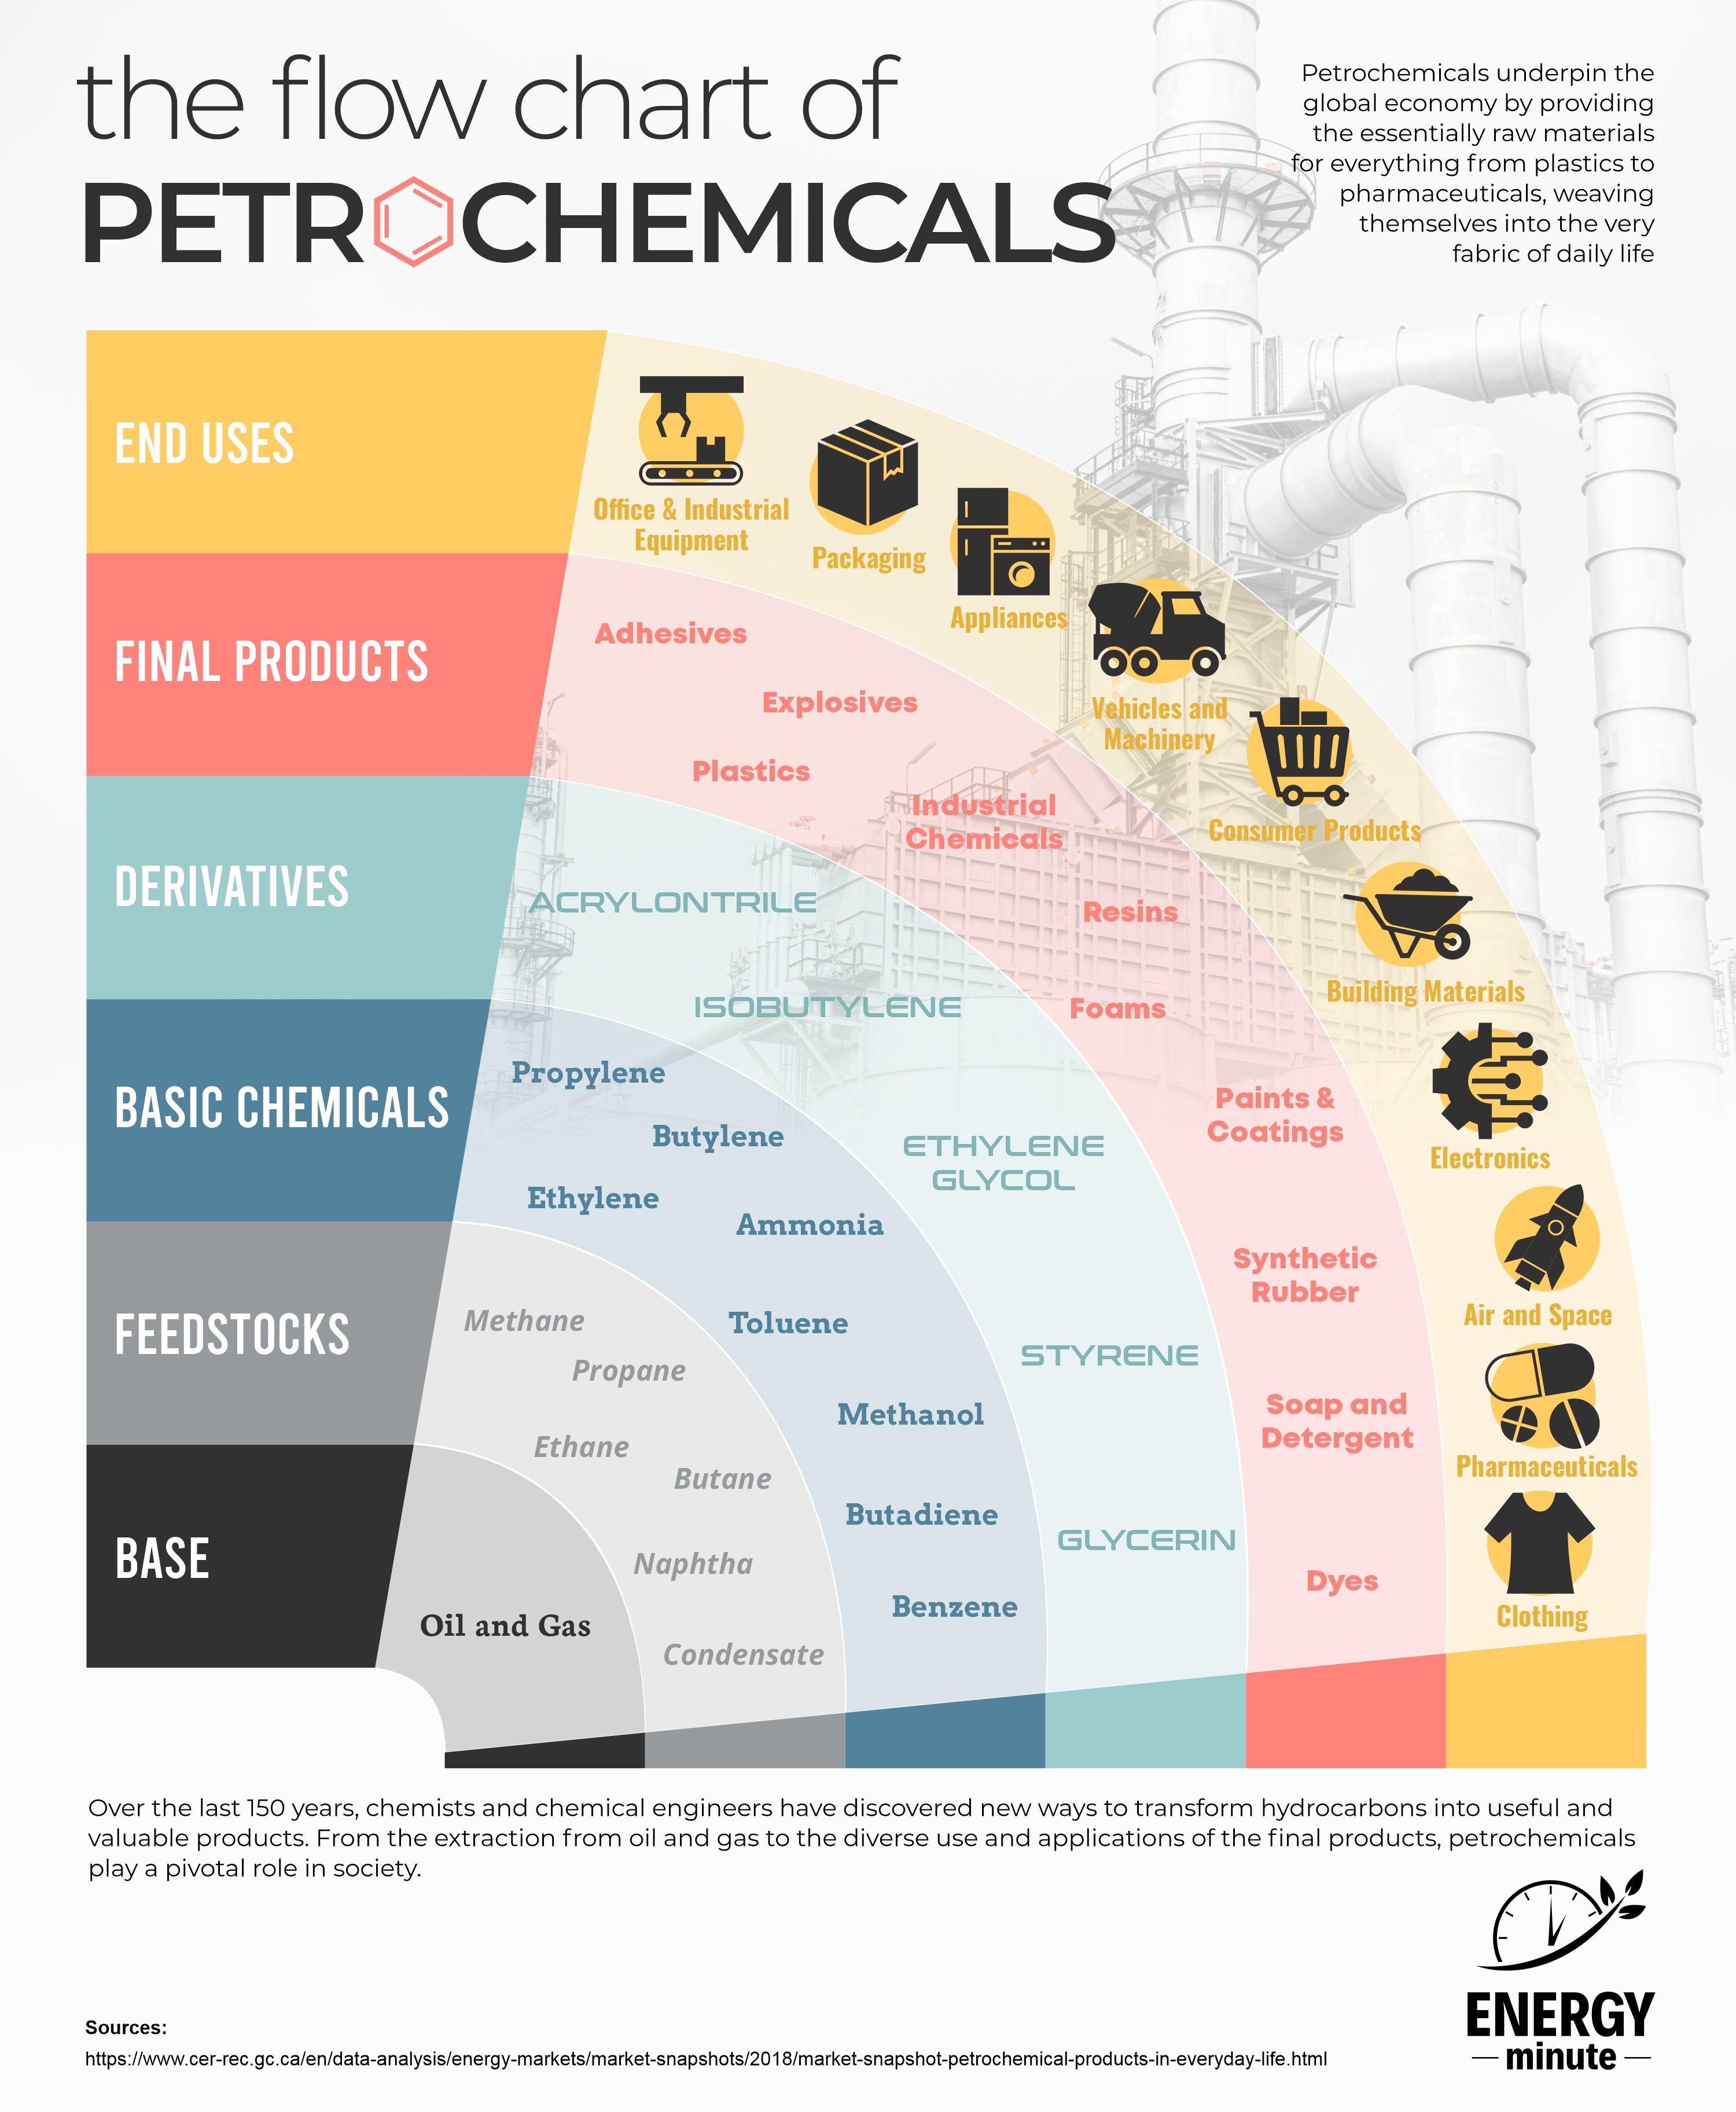 Petrochemicals: Step-by-Step